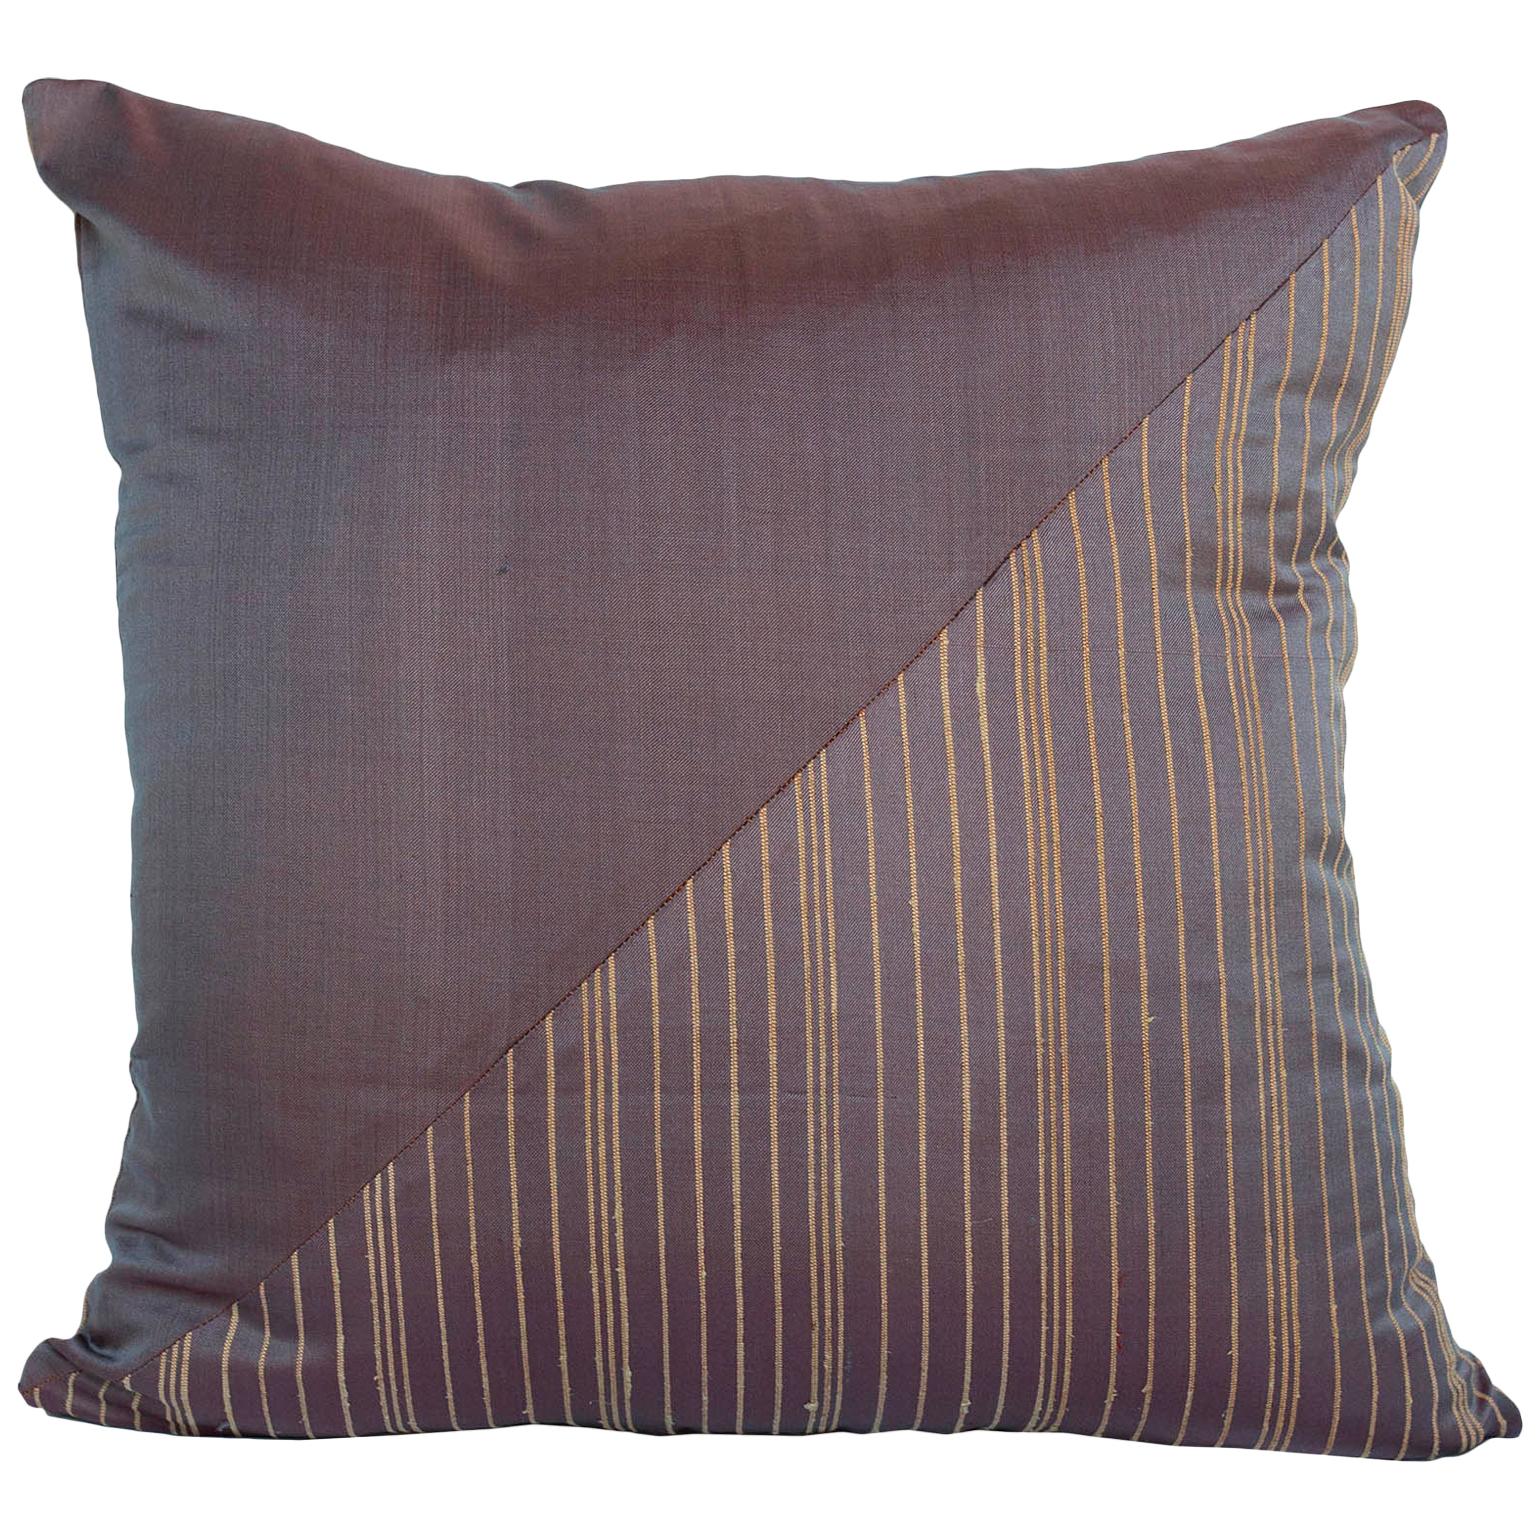 Lotus Flower and Silk Pillow from Myanmar, Marron Brown